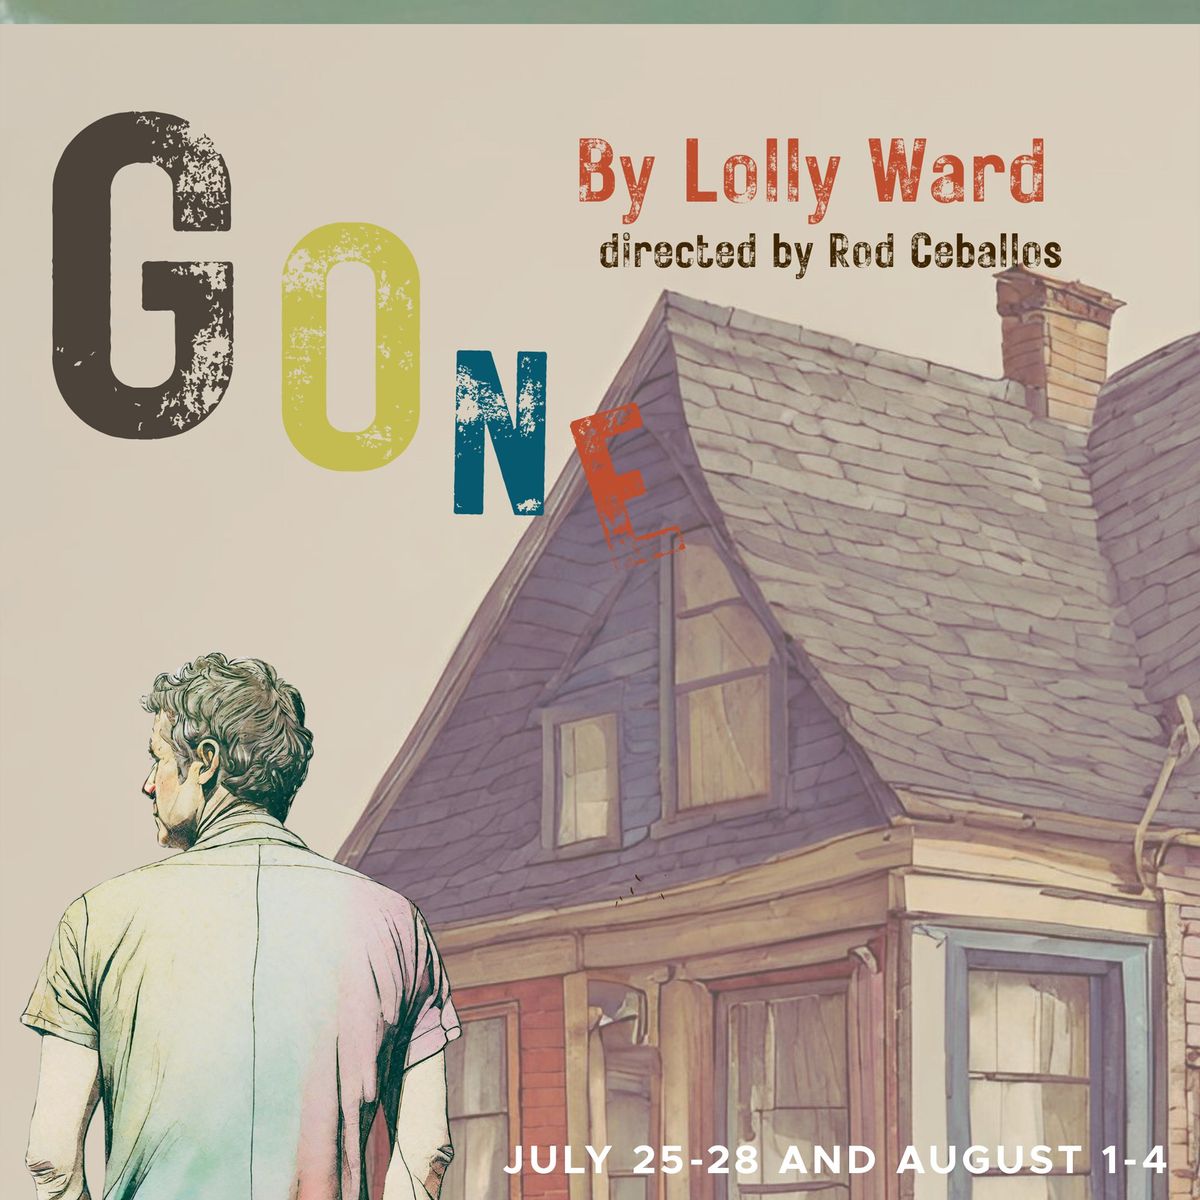 Theatre 33 presents Gone by Lolly Ward